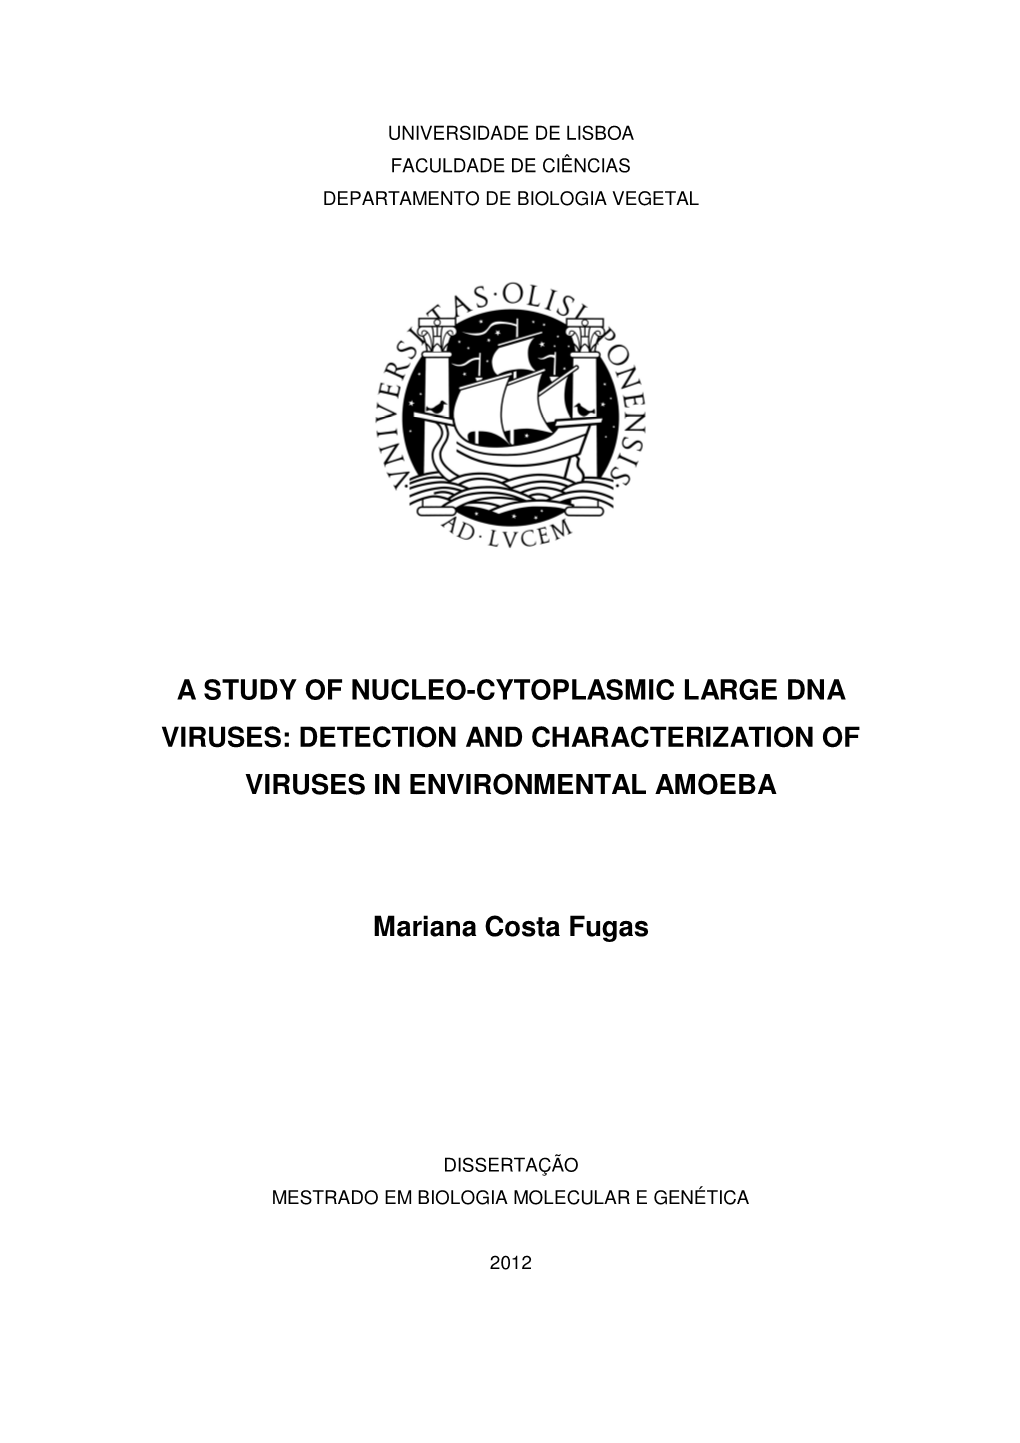 A Study of Nucleo-Cytoplasmic Large Dna Viruses: Detection and Characterization of Viruses in Environmental Amoeba